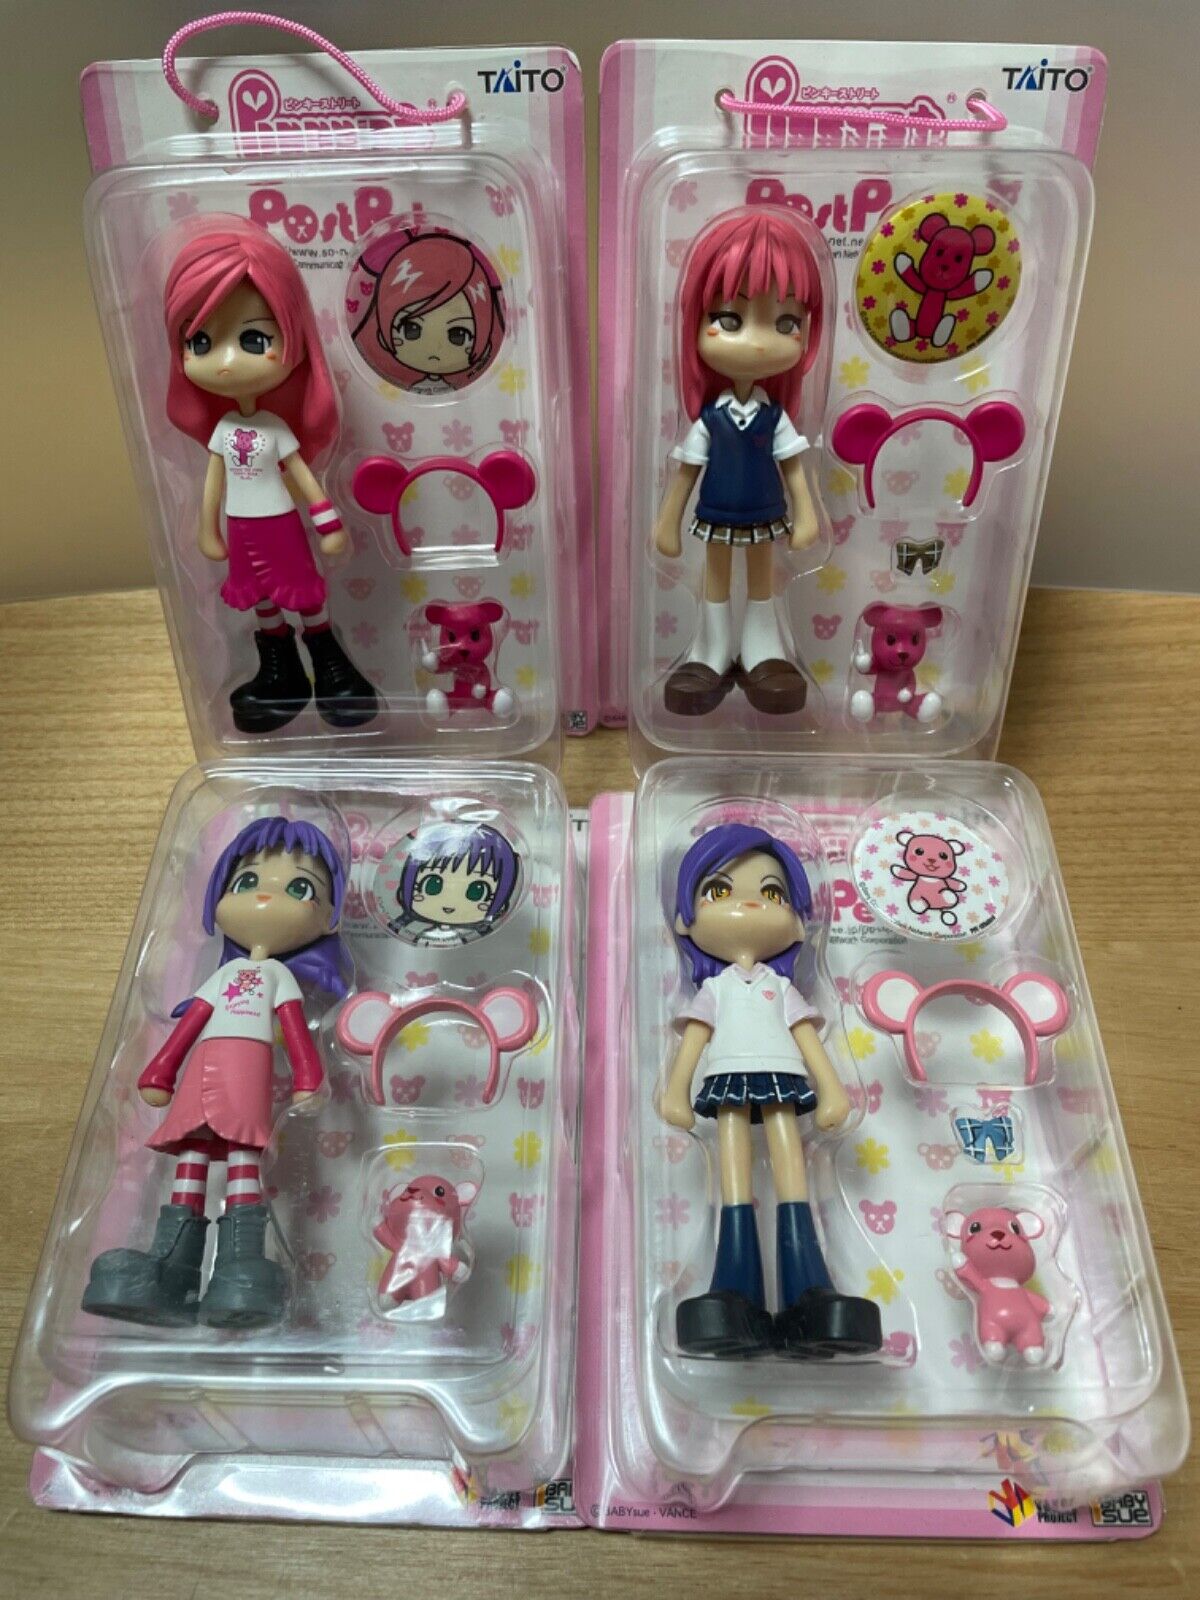 Pinky:st Street cos POST PET 4set TAITO limited Figure rare anime Japan toy